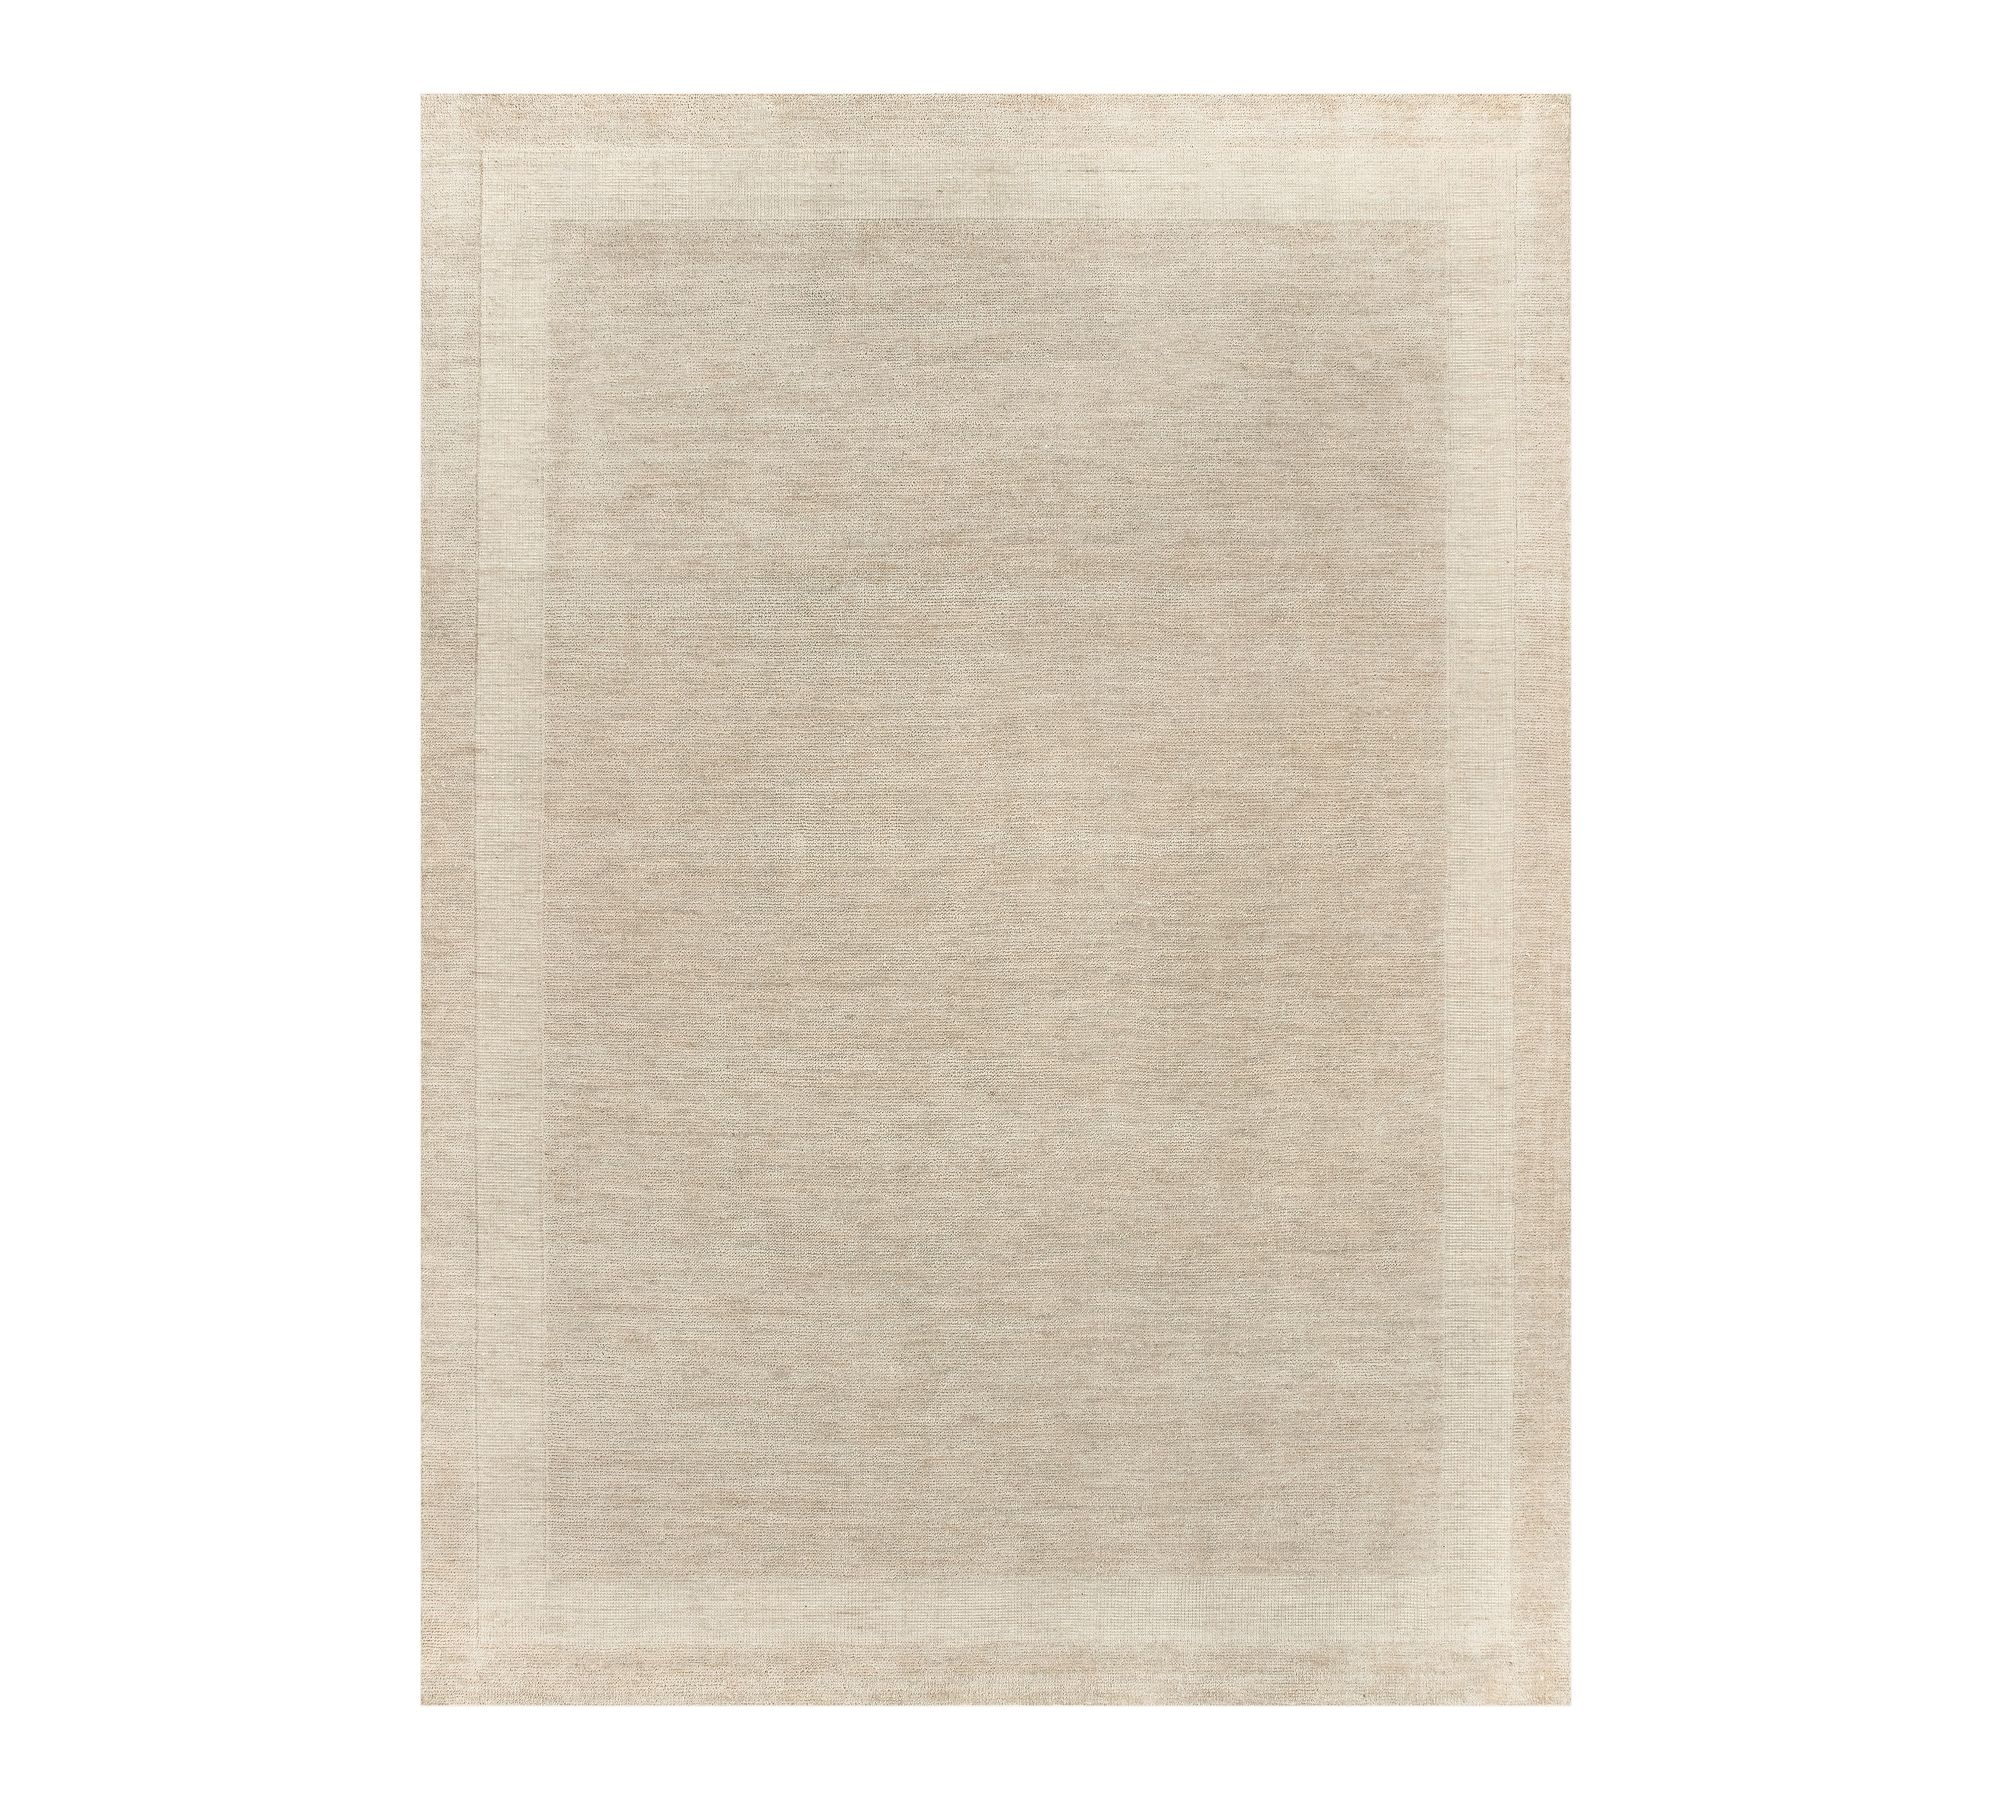 Connor Performance Wool Rug